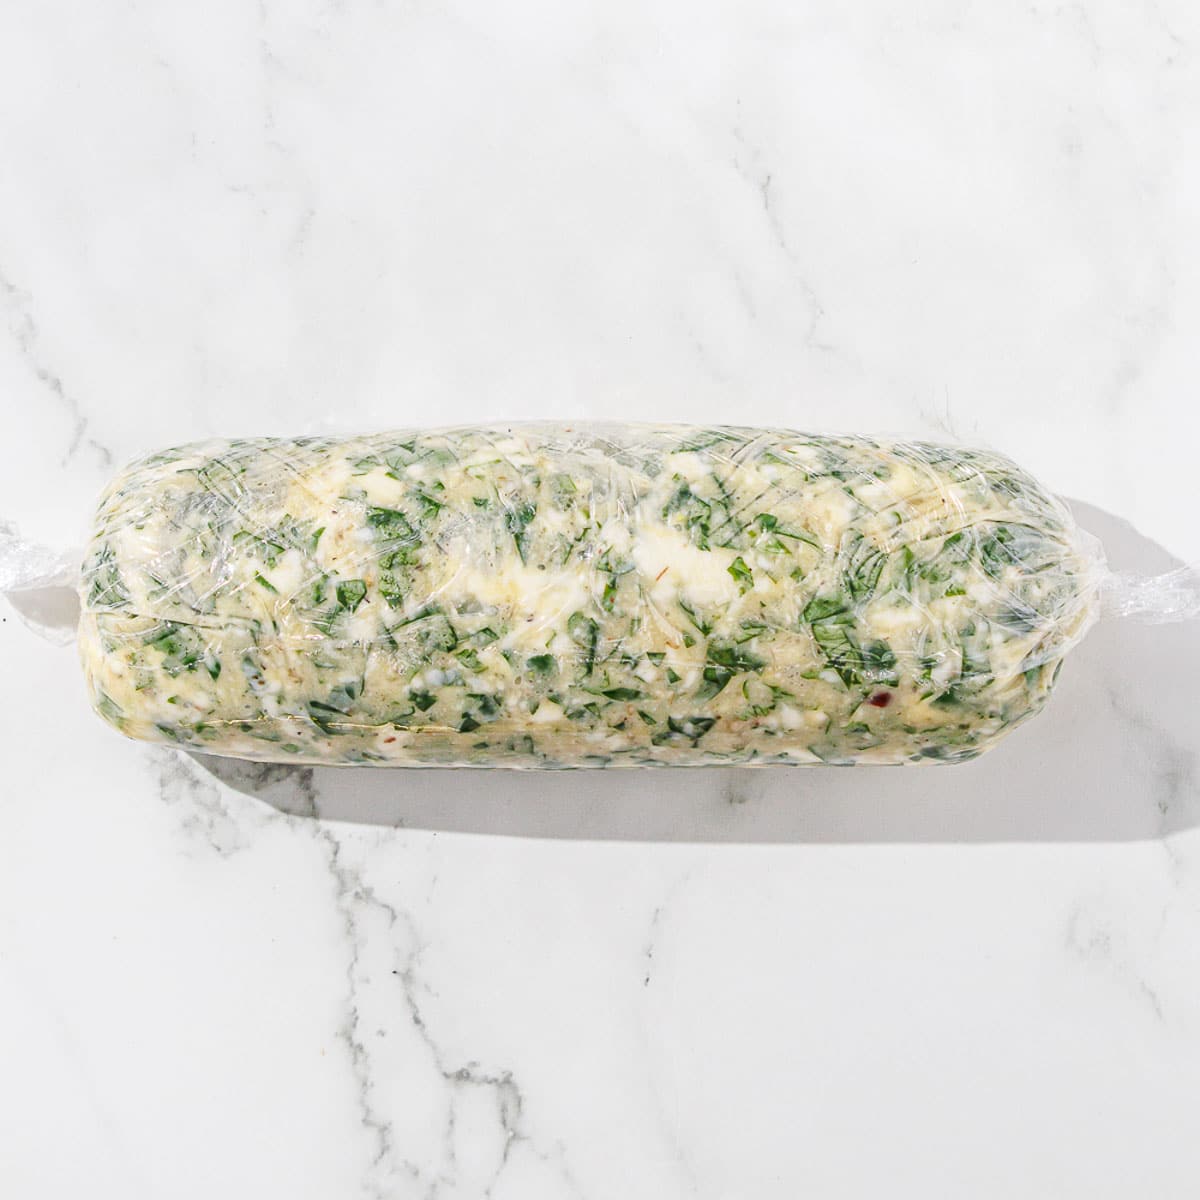 A roll of chimichurri butter wrapped in plastic on a marble surface.